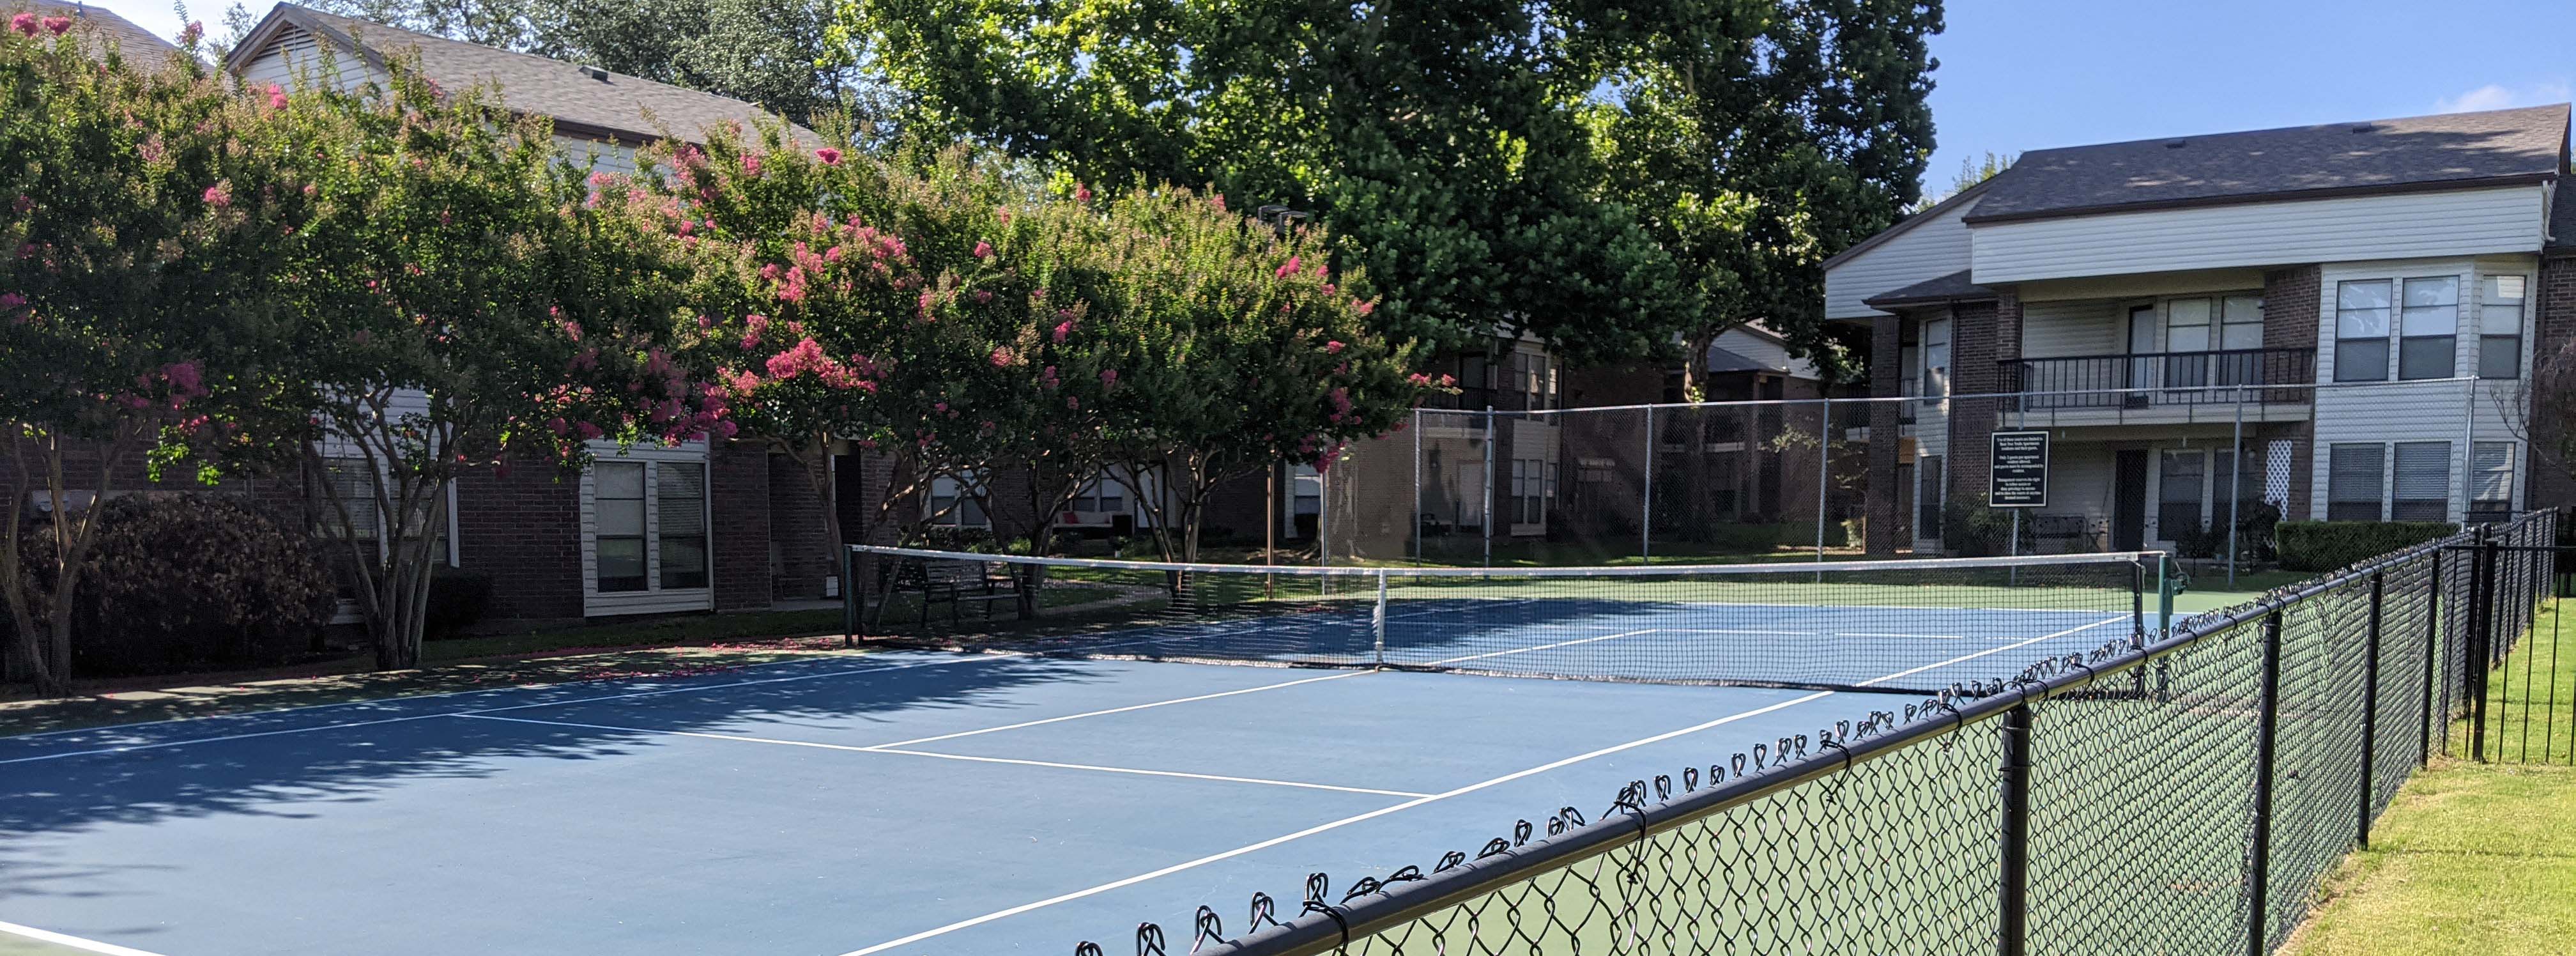 Apartments with tennis courts.